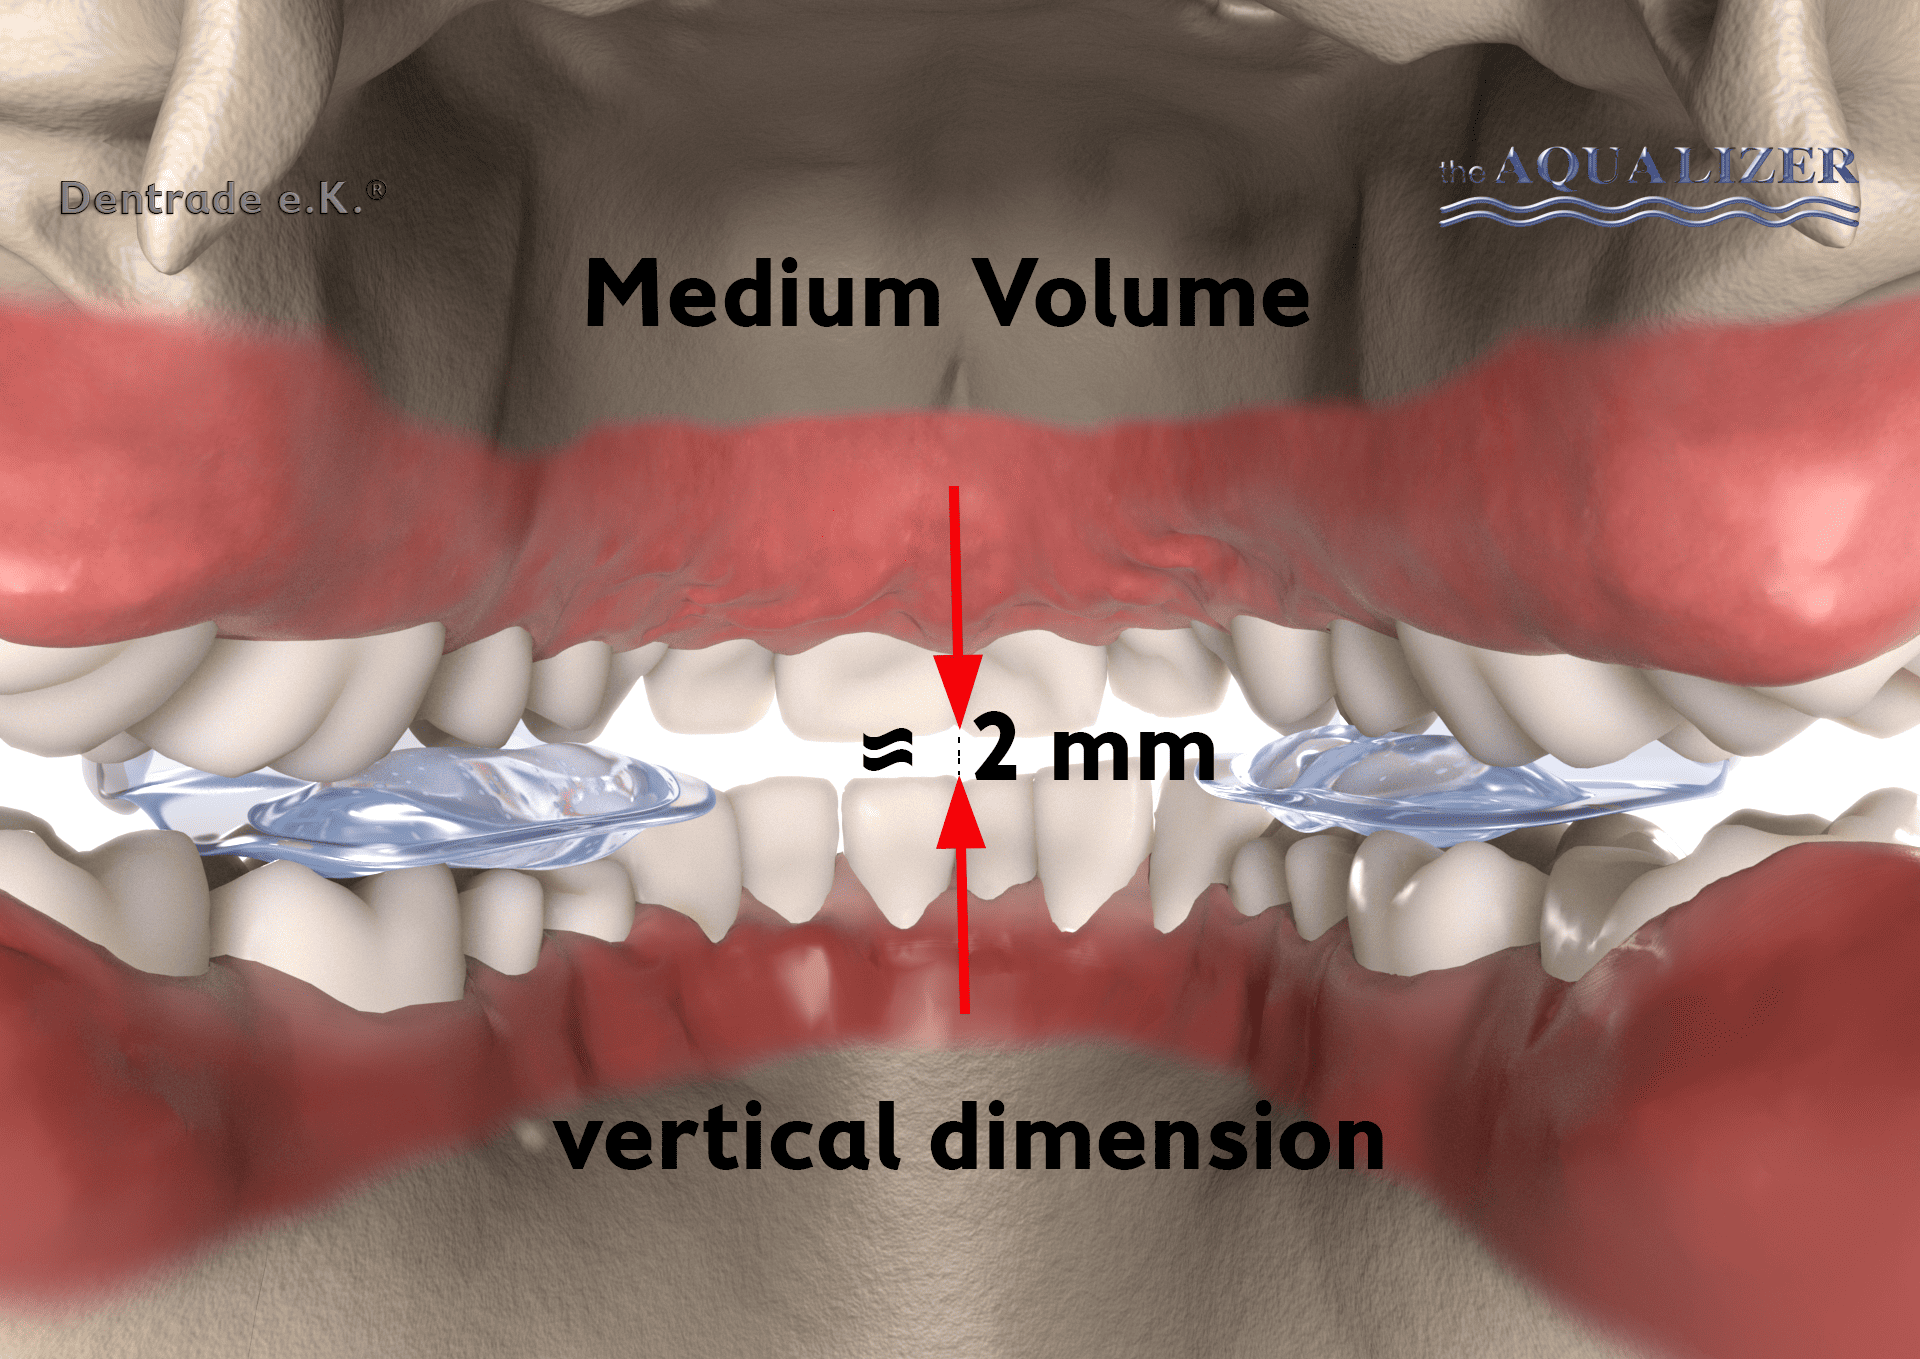 Illustration of a bite cavity with two pads on the molars, which provide a distance of about 2 mm